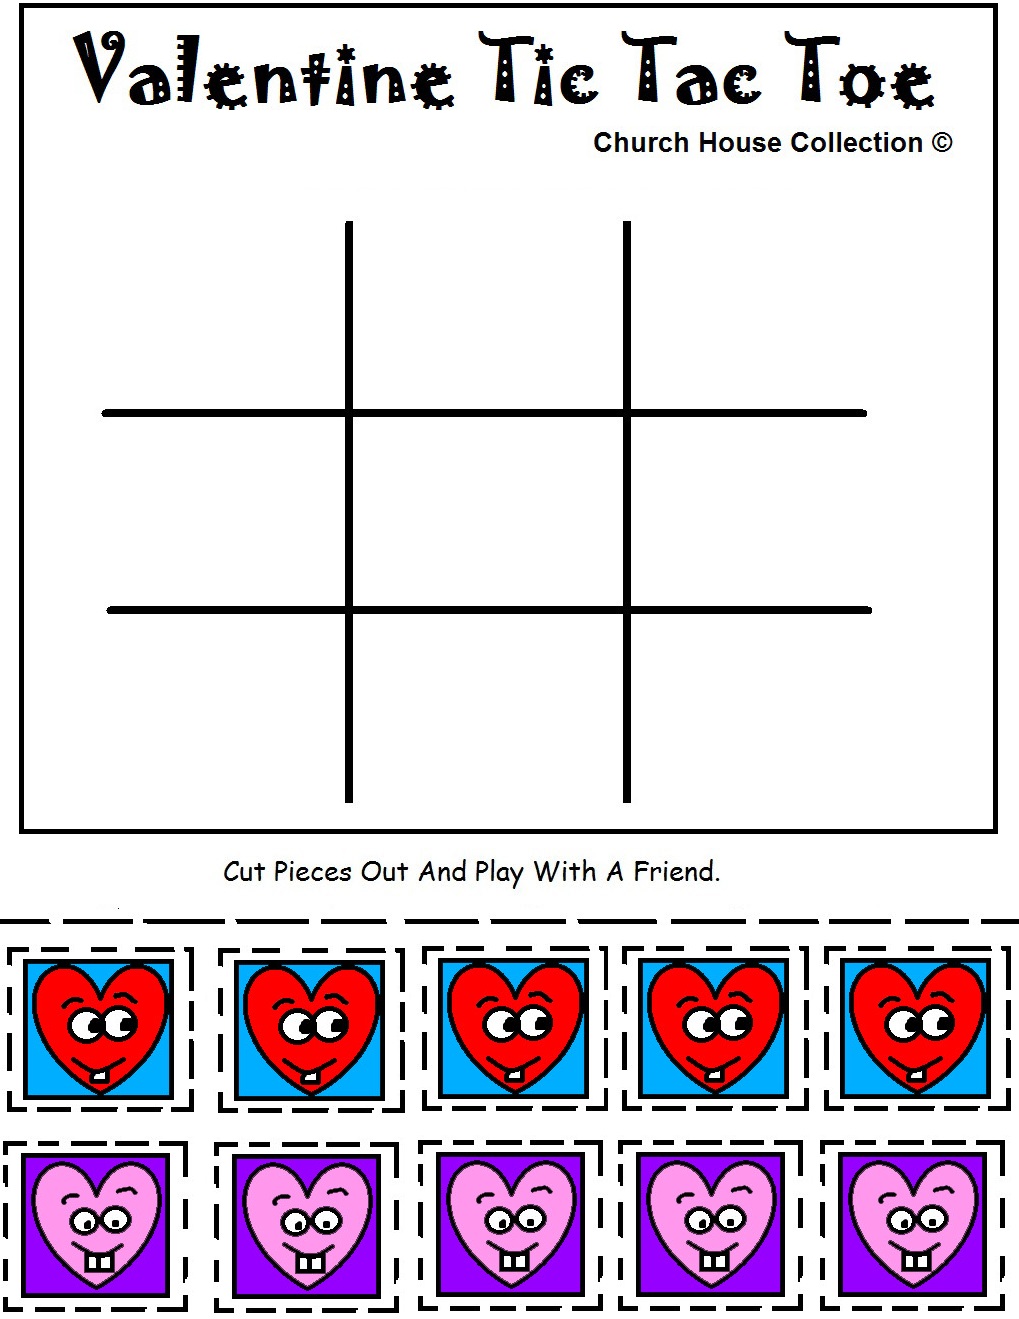 church-house-collection-blog-printable-valentine-tic-tac-toe-game